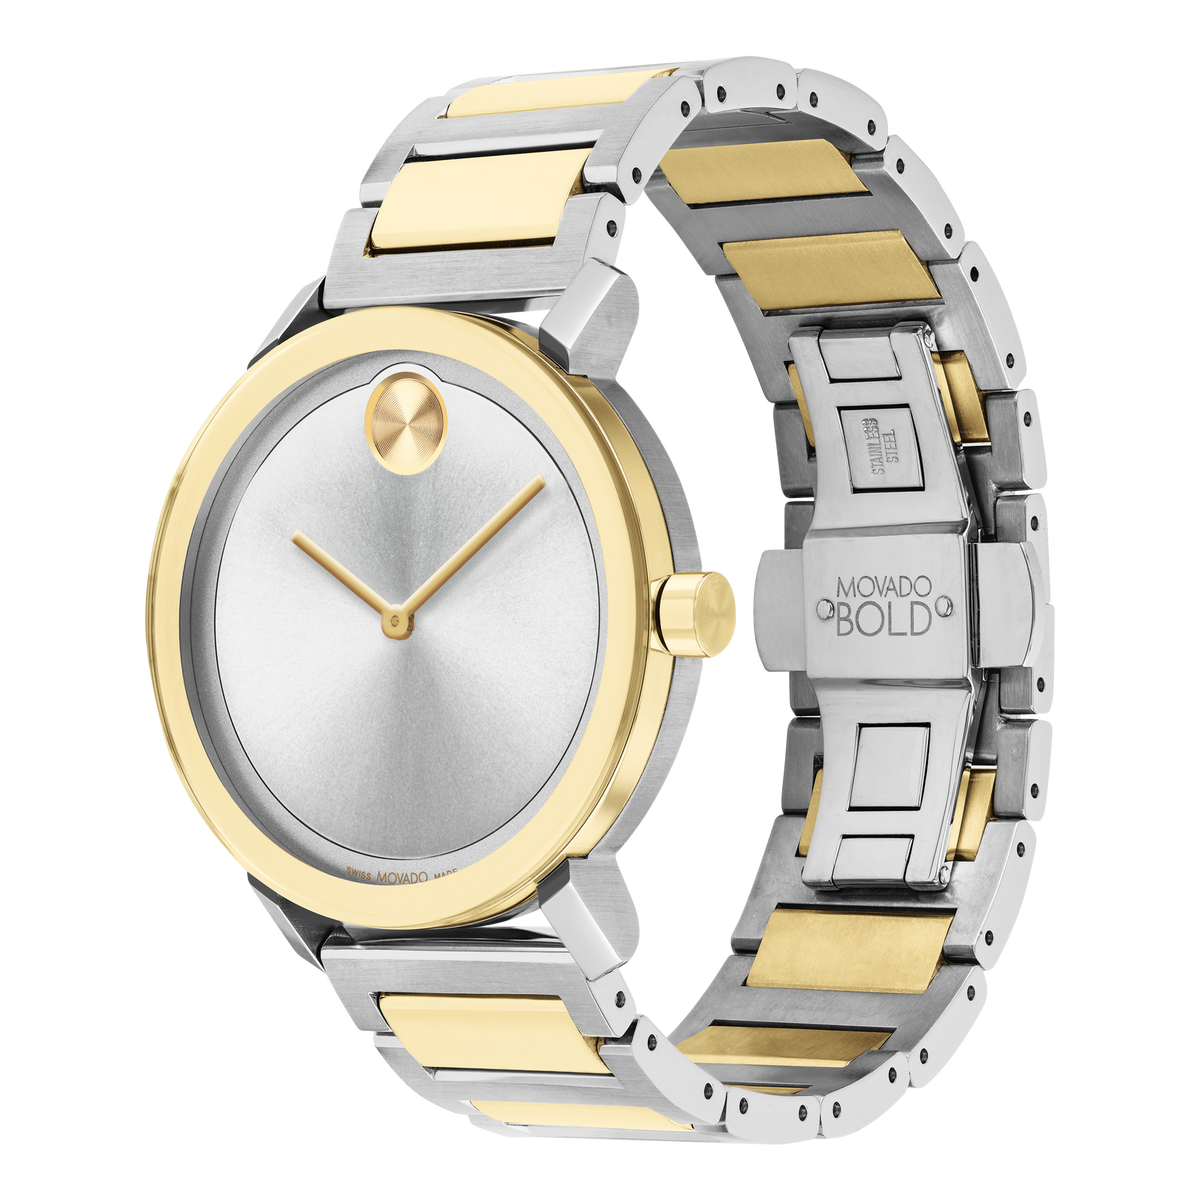 Movado Bold Watches, Movado Museum Watch for Men & Women